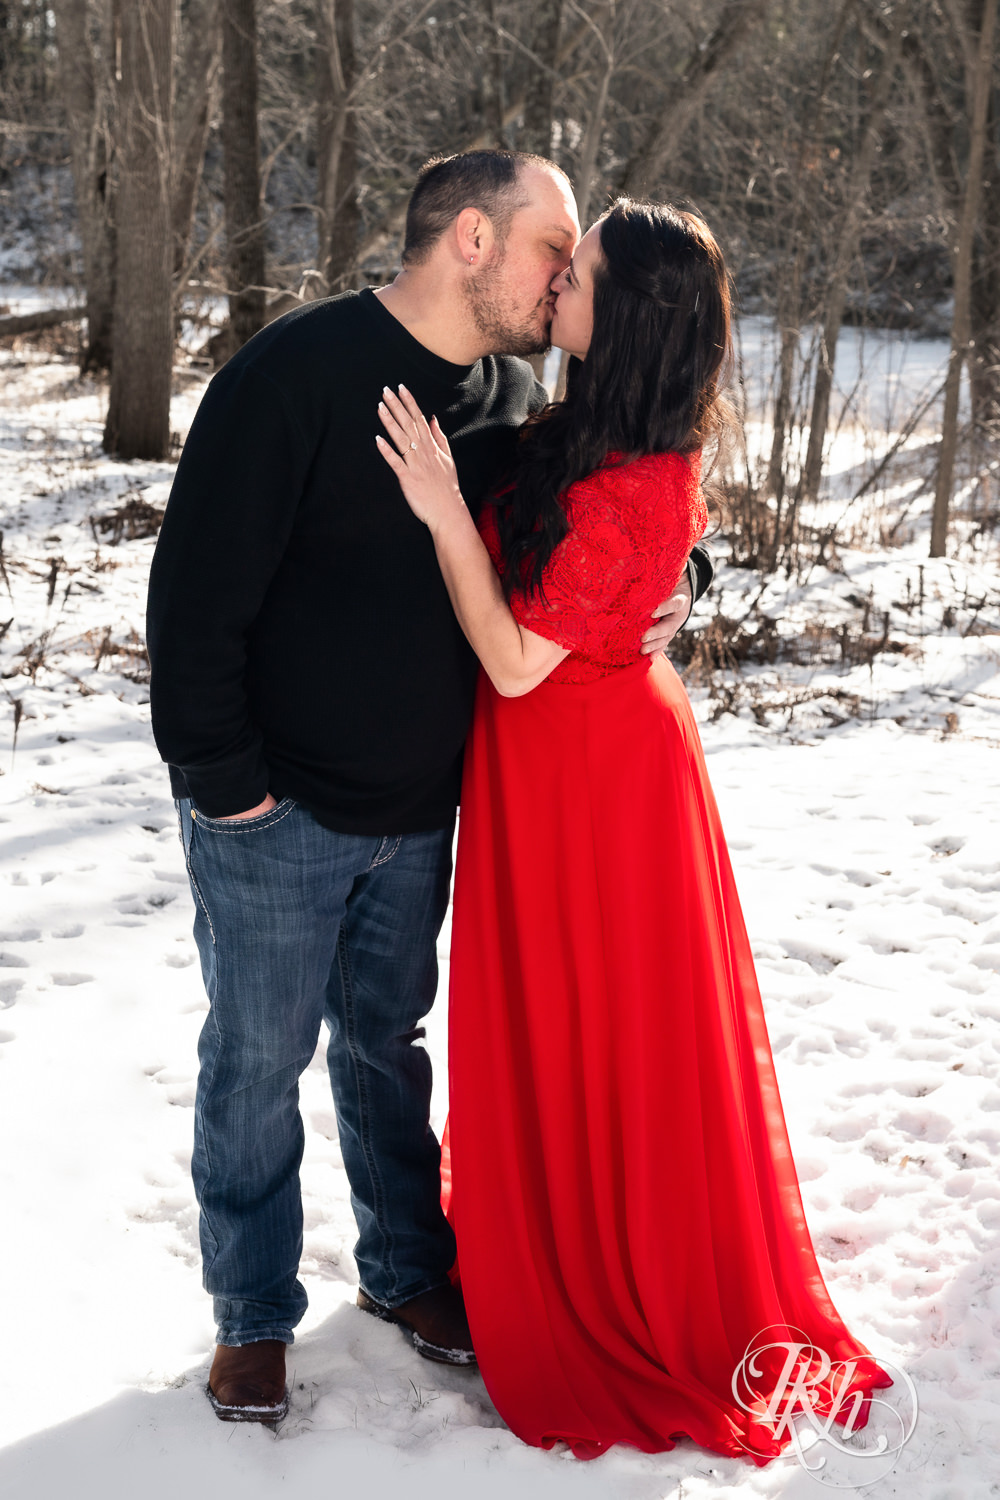 Man in jeans and woman in red dress kiss in the woods during winter engagement photography in Pine City, Minnesota.